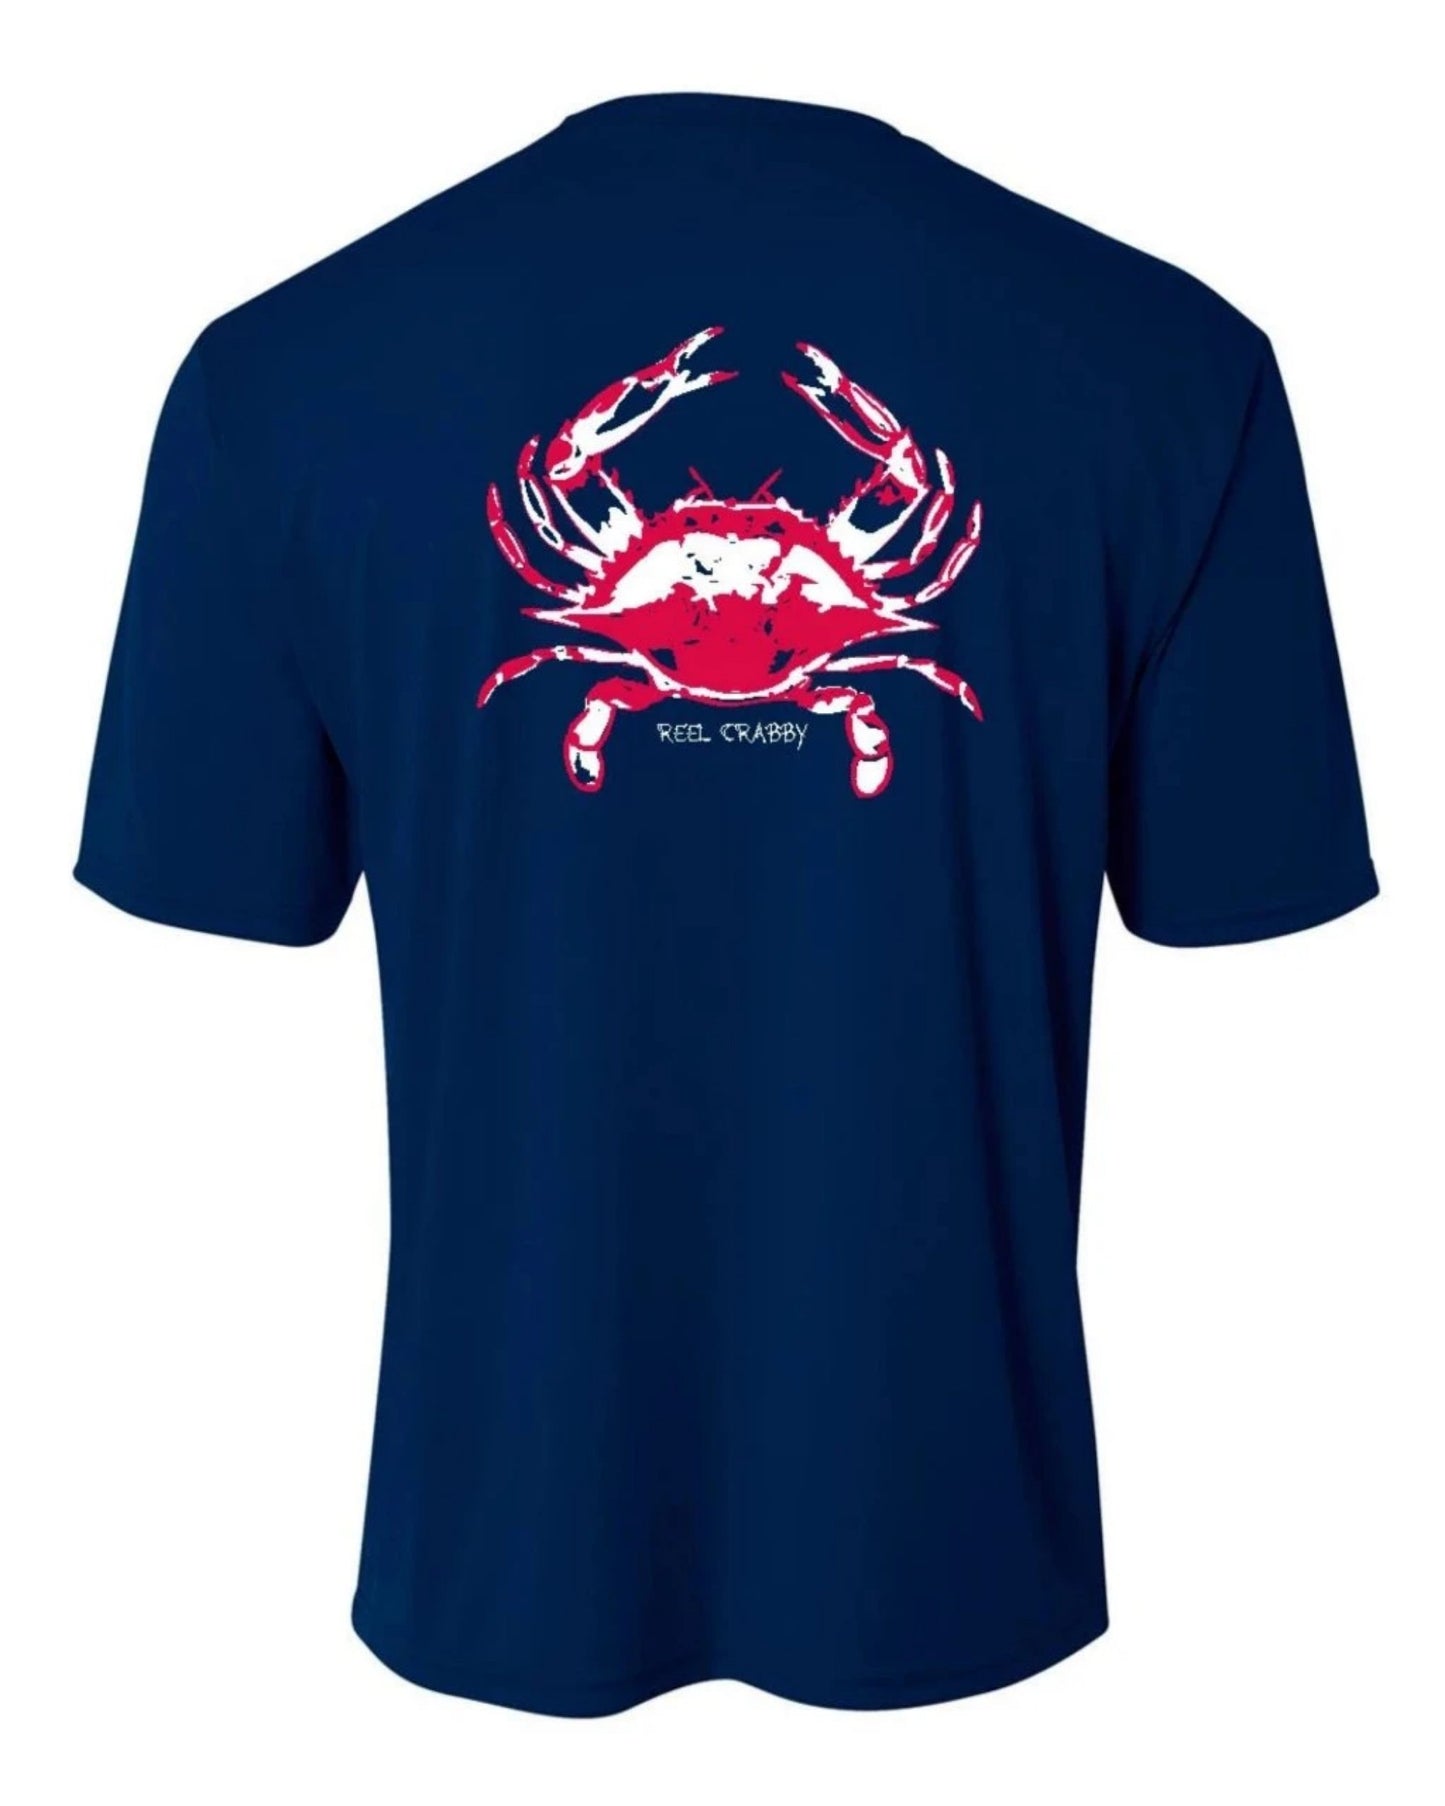 Navy Youth Crab "Reel Crabby" Short Sleeve Performance Dry-Fit Shirts with Sun Protection by Reel Fishy Apparel